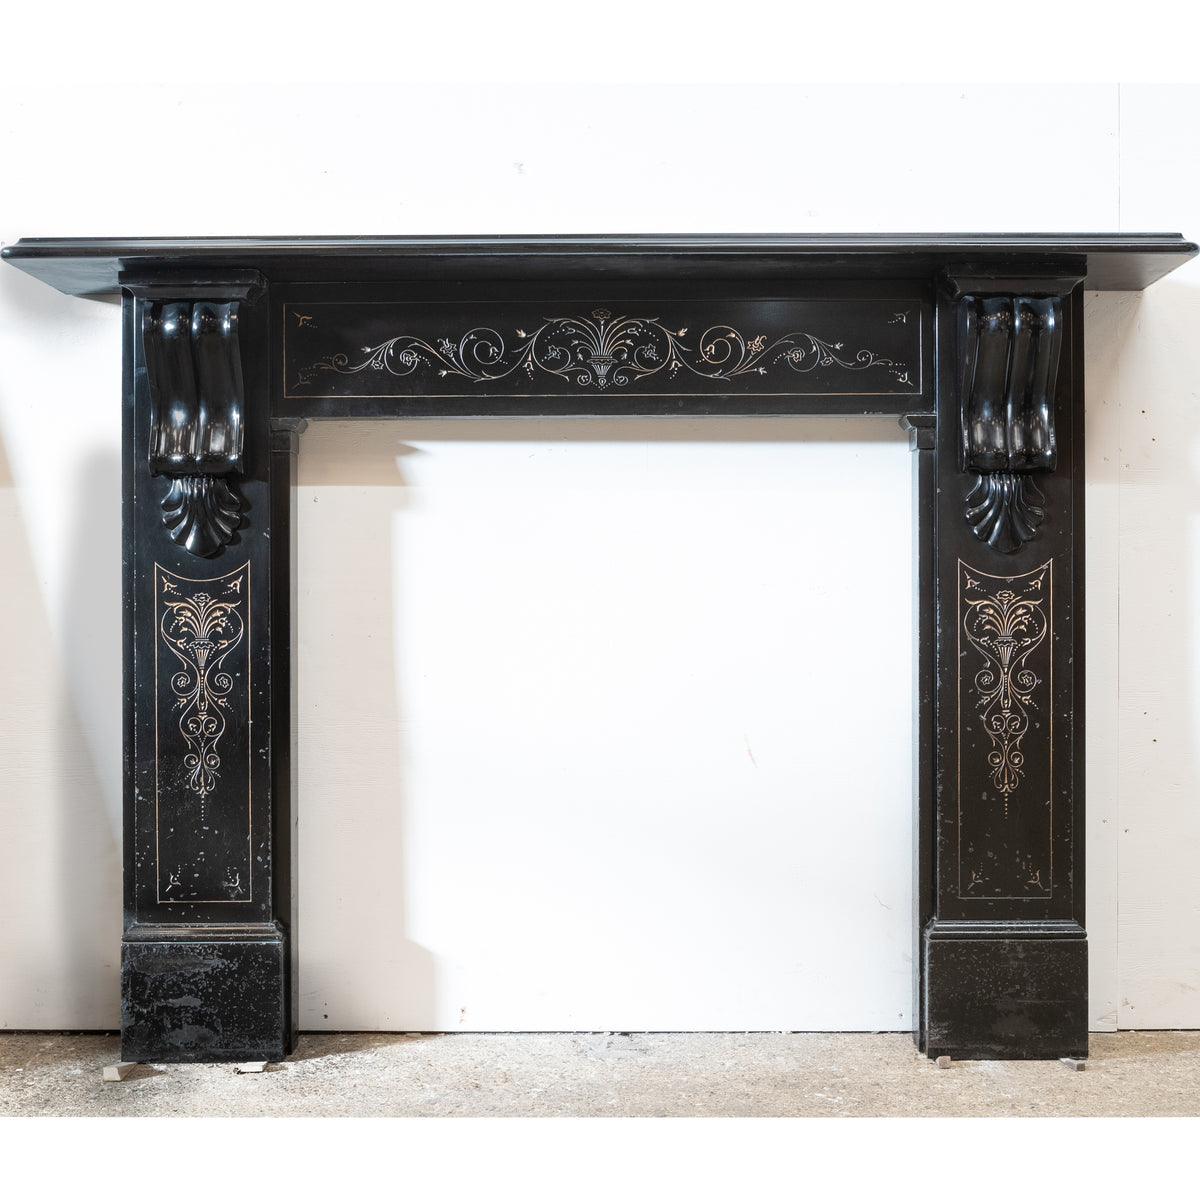 Antique Victorian Slate Fireplace Surround With Corbels &amp; Gold Detailing | The Architectural Forum